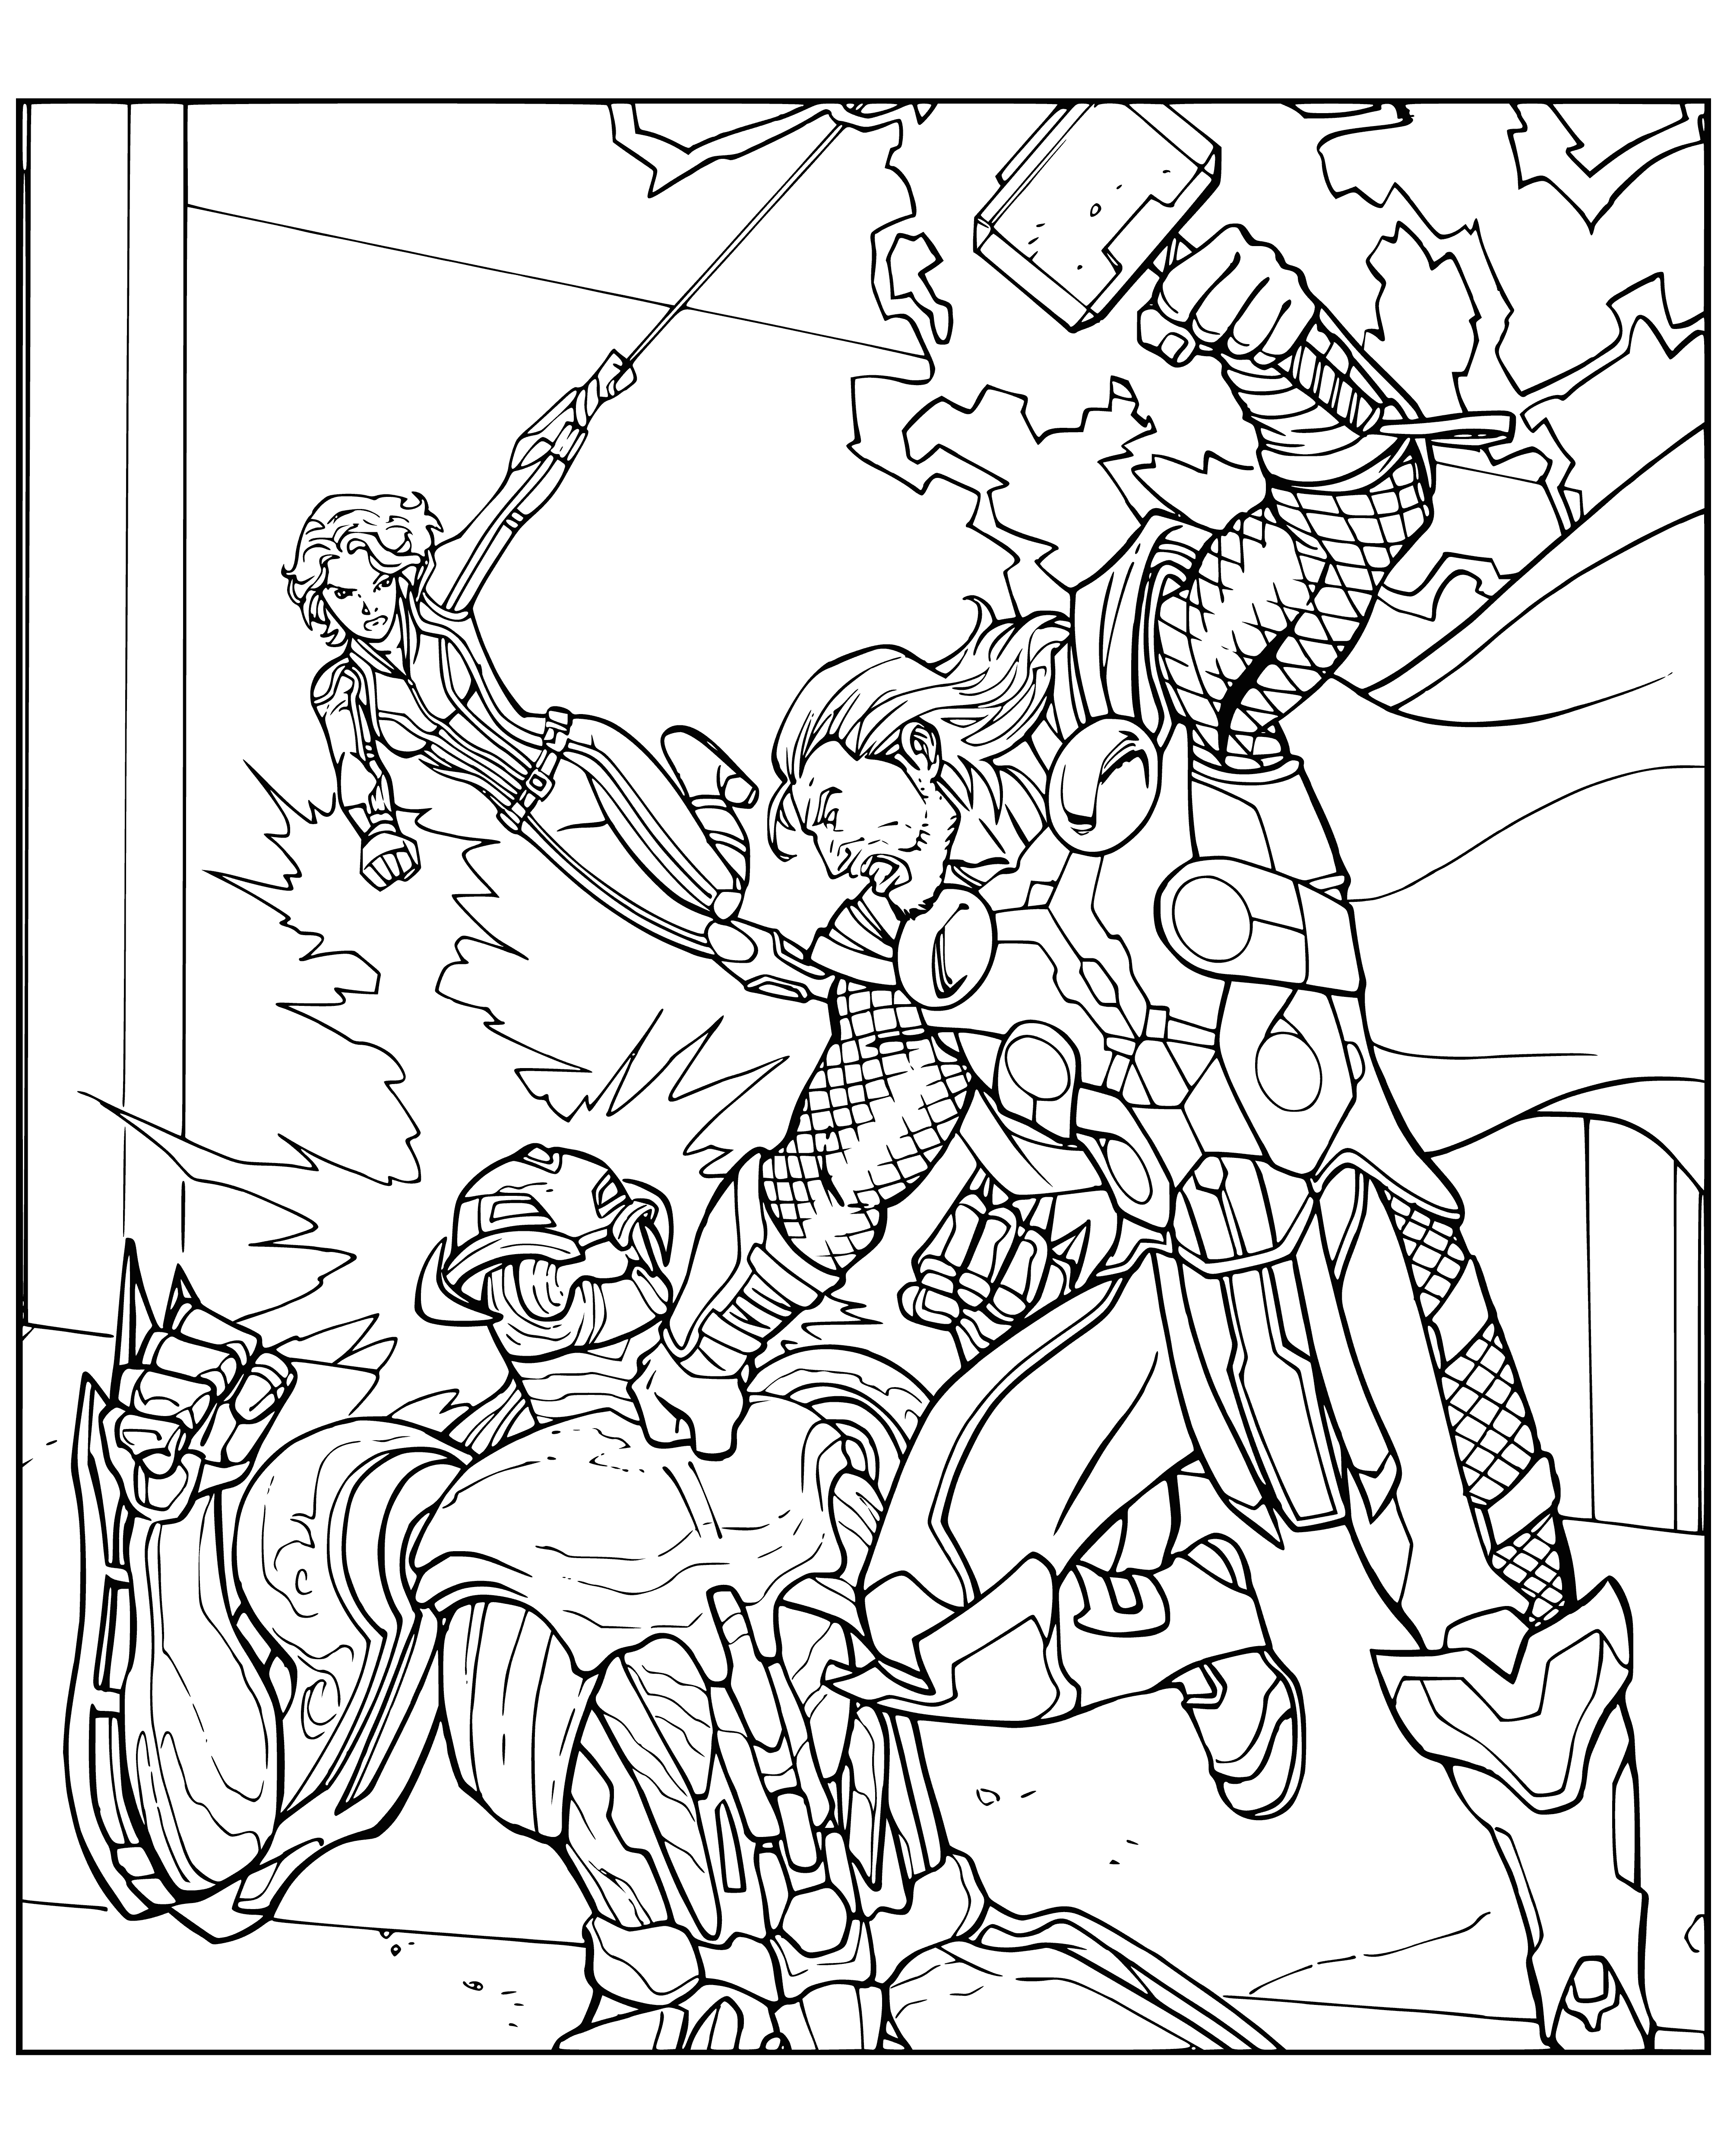 Thor, Ultron and Black Widow coloring page